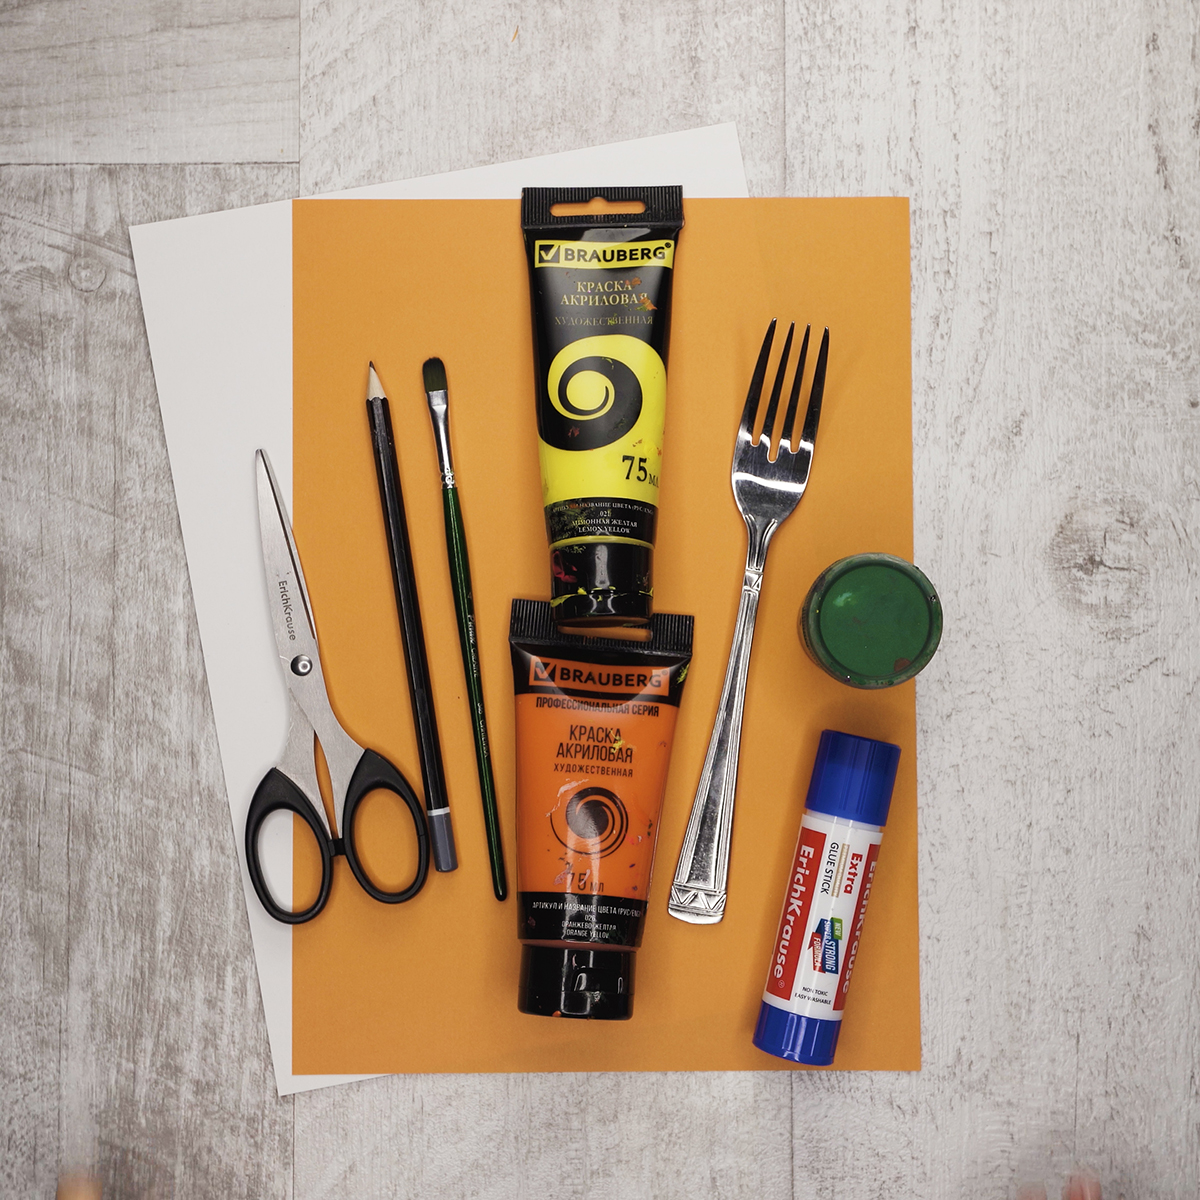 The supplies are orange and white paper, yellow, green and orange paints, a glue stick, a fork, a pencil, a brush and scissors